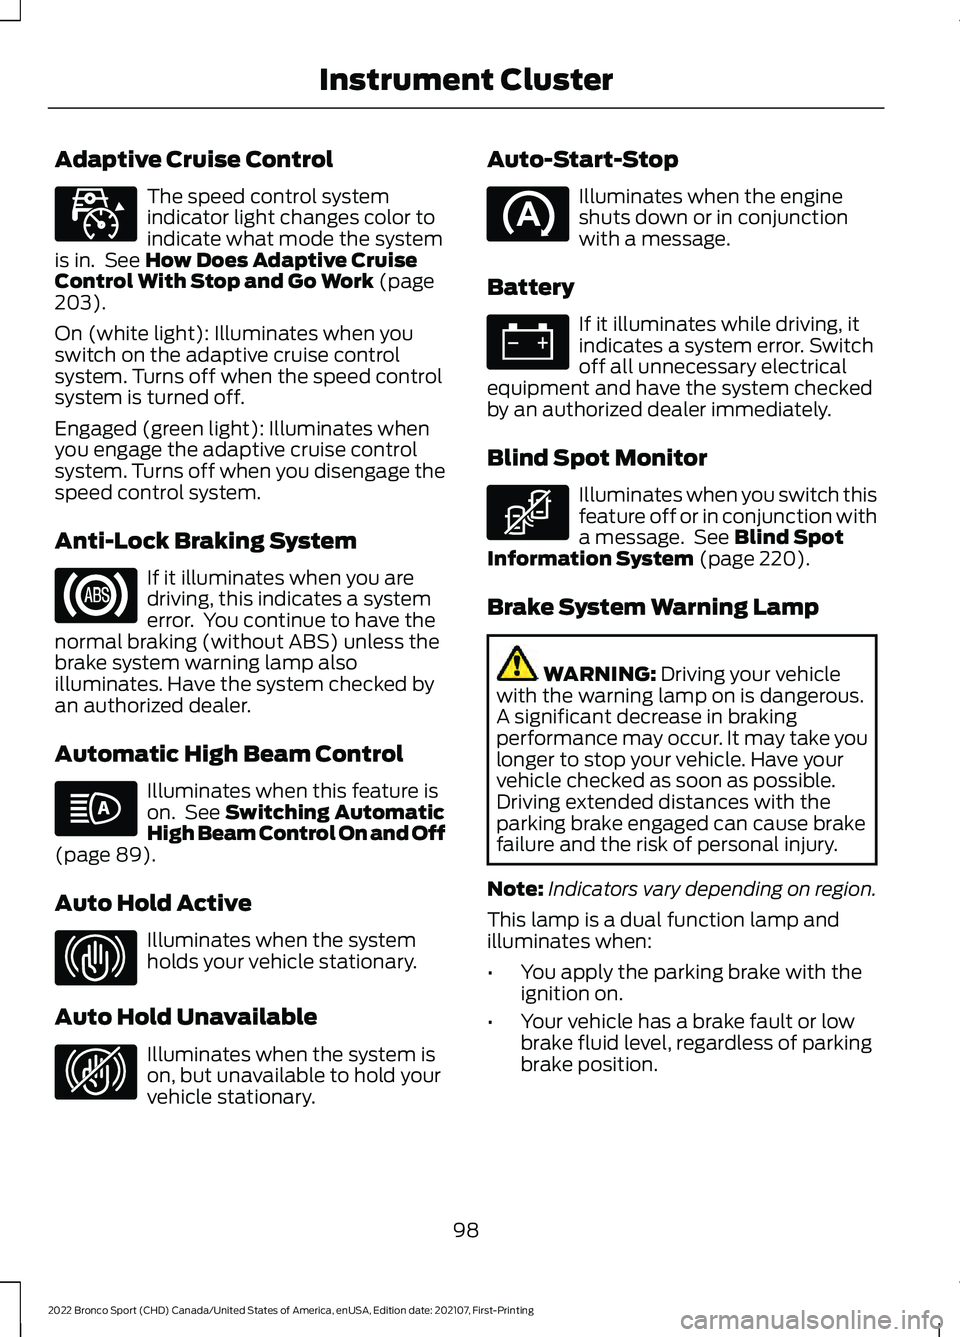 FORD BRONCO SPORT 2022  Owners Manual Adaptive Cruise Control
The speed control system
indicator light changes color to
indicate what mode the system
is in.  See How Does Adaptive Cruise
Control With Stop and Go Work (page
203).
On (white